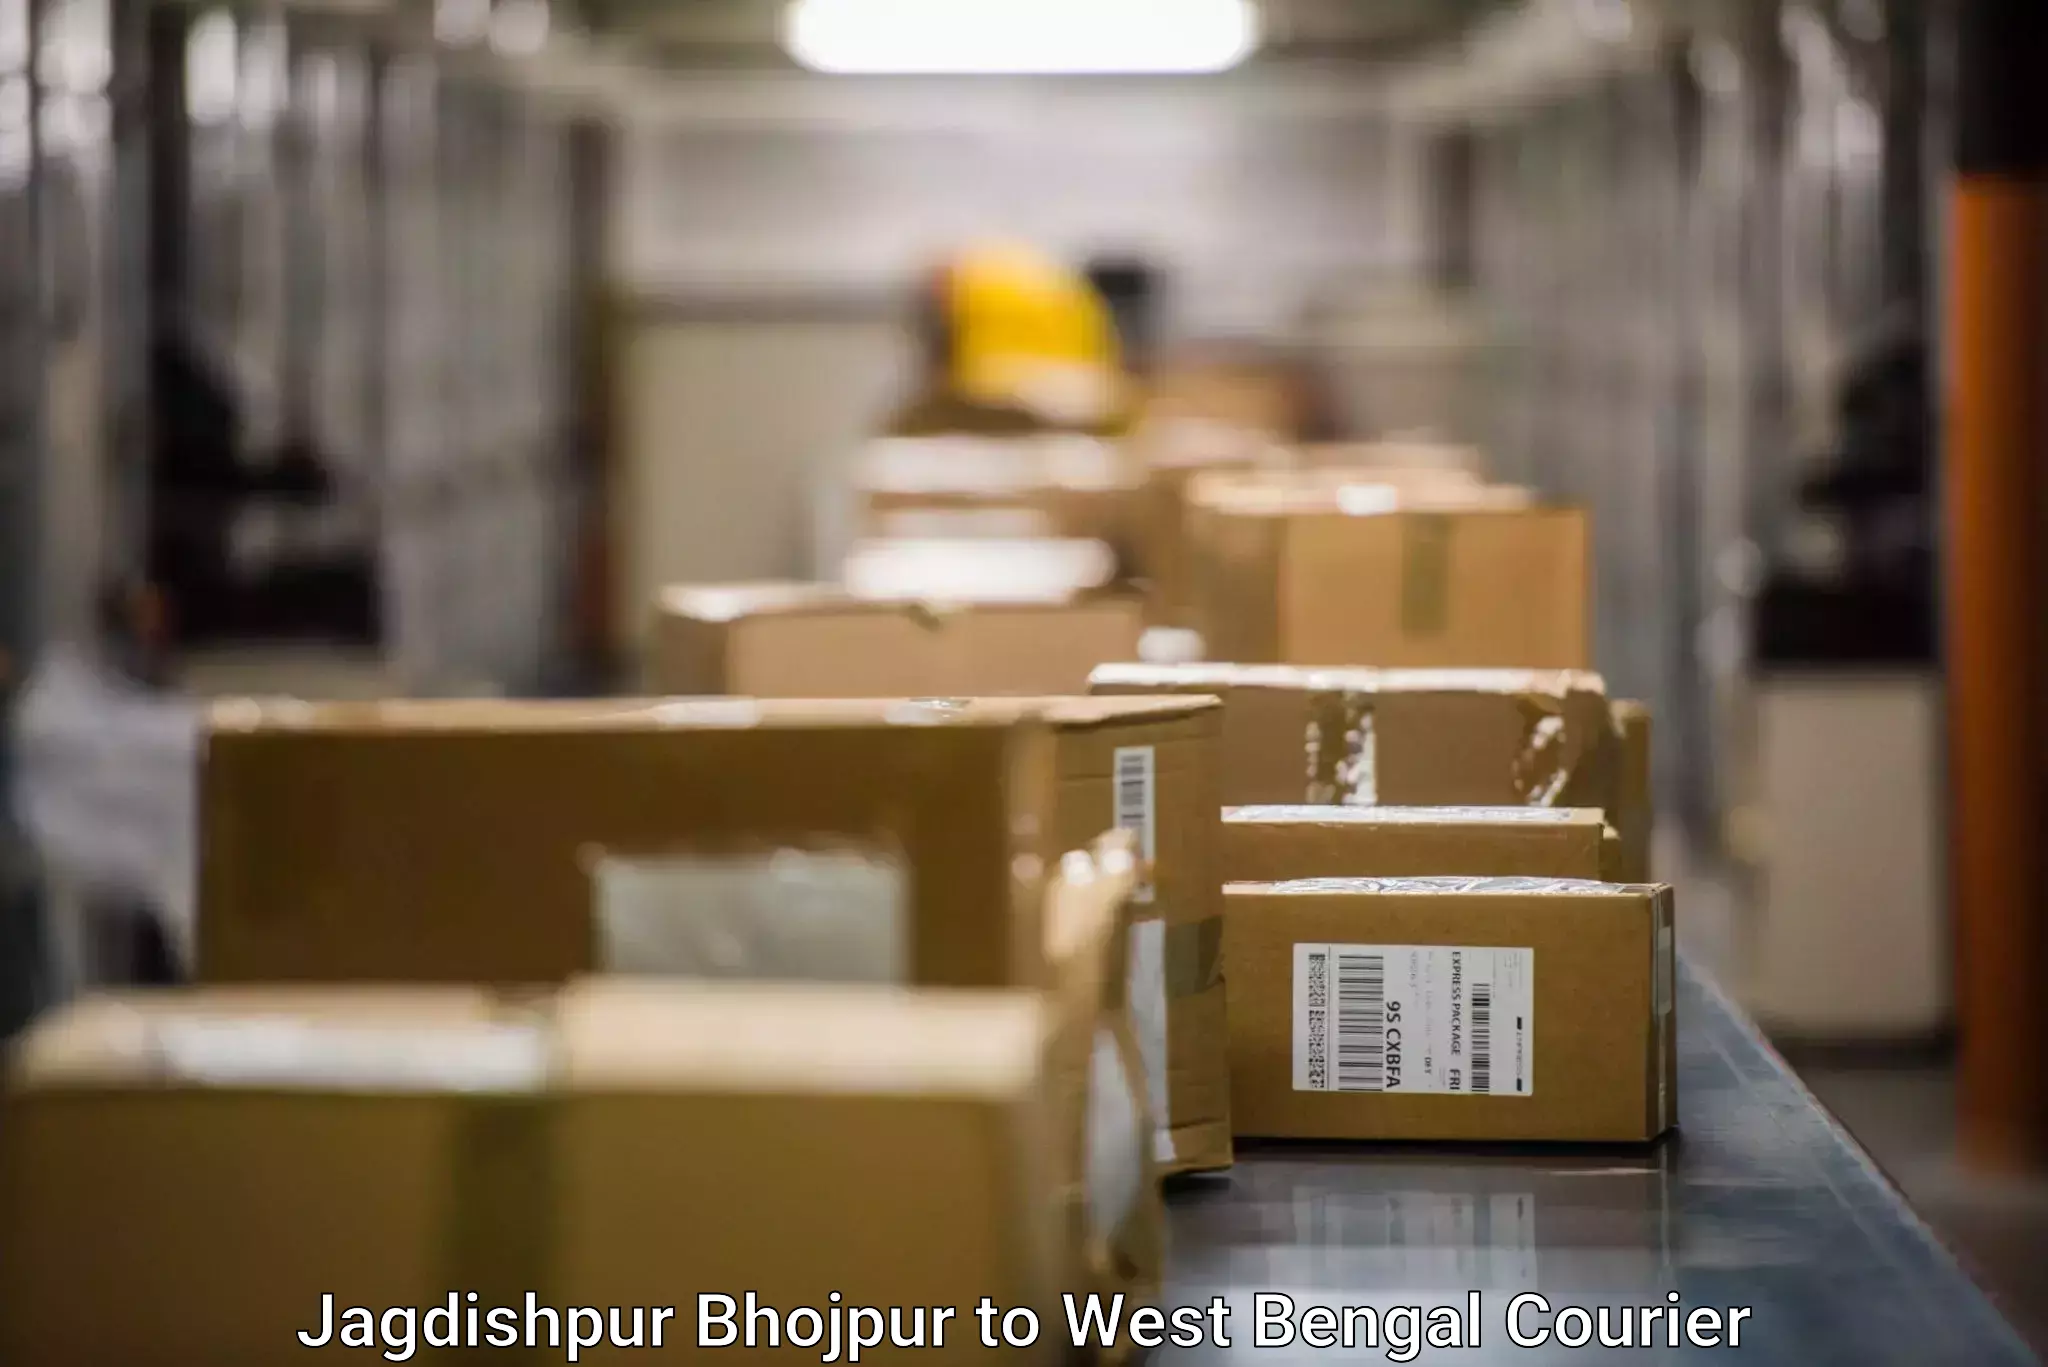 Cargo delivery service Jagdishpur Bhojpur to West Bengal